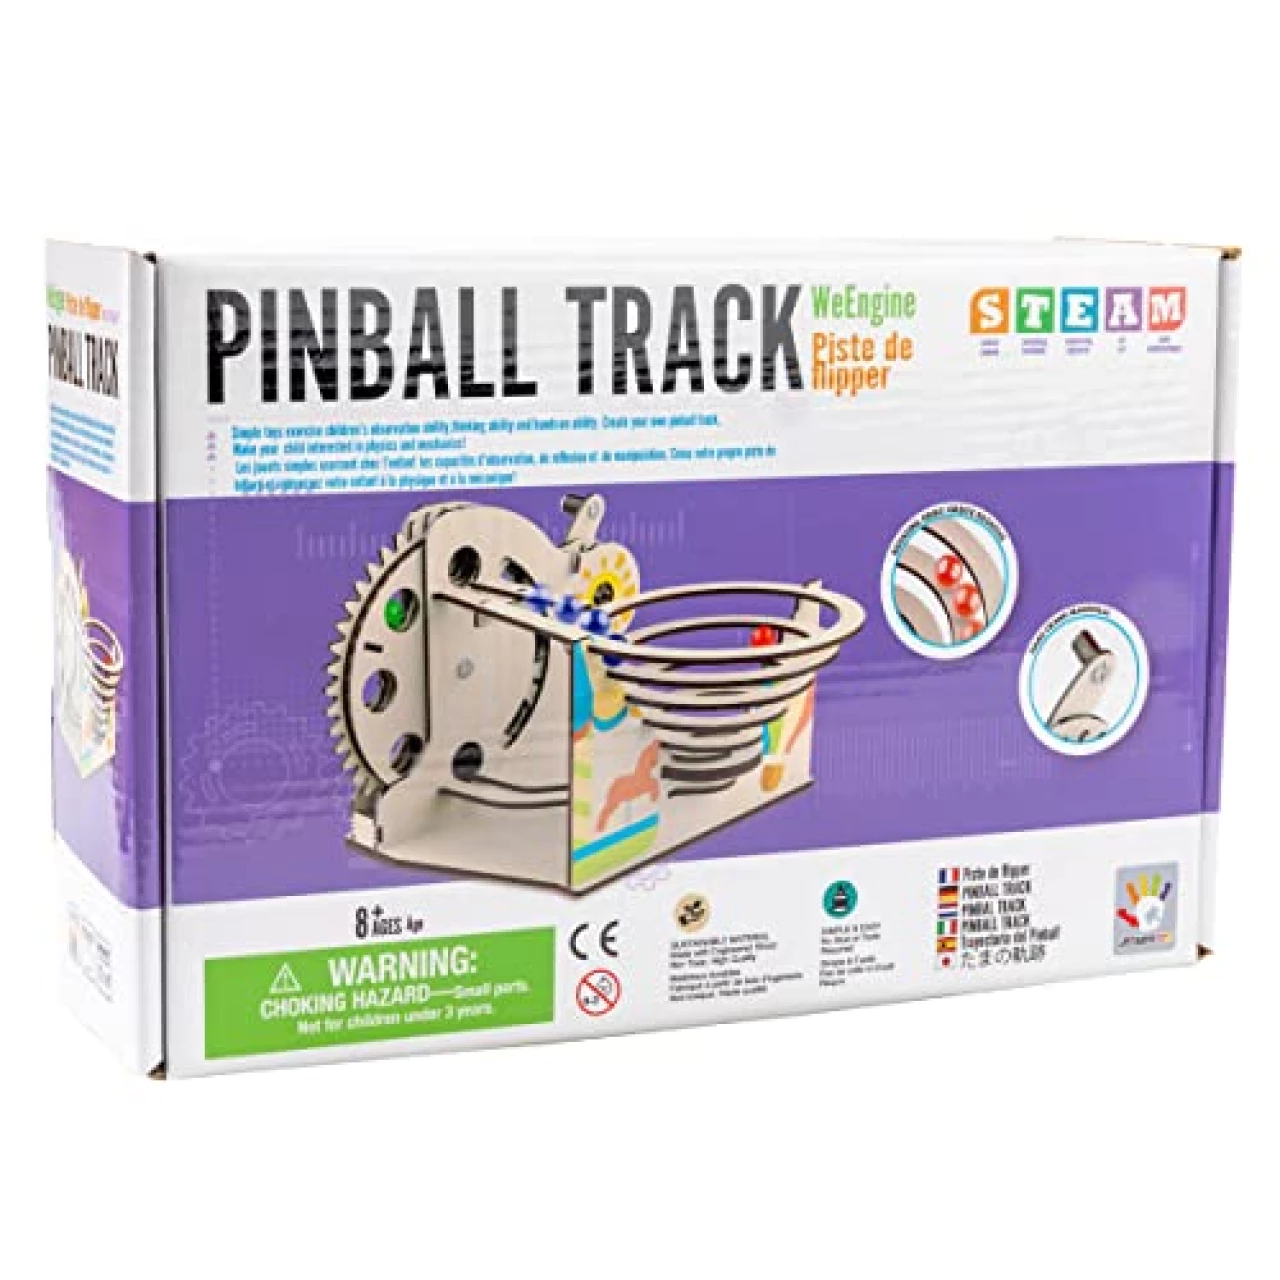 WECHARM HOME Pinball Track Steam Toy.Pinball Machine Set Wooden 3D Puzzles for 8-12 Years Old Kids and Adults,Birthday Gift, for Kids Age 8 Years Old (Pinball Track)